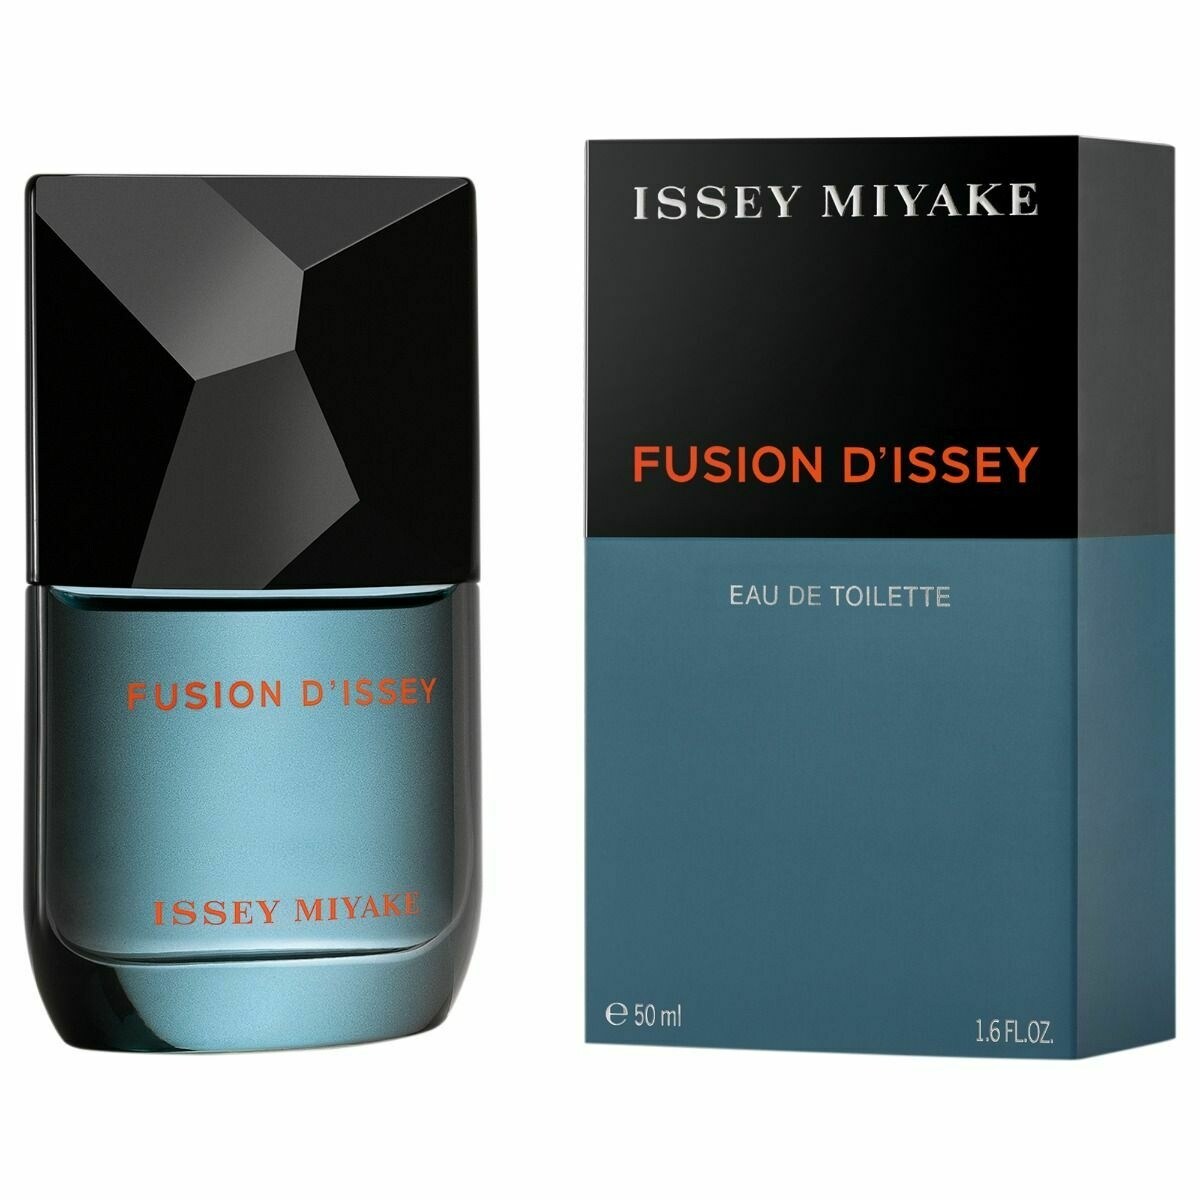 Fusion d'Issey by Issey Miyake » Reviews & Perfume Facts